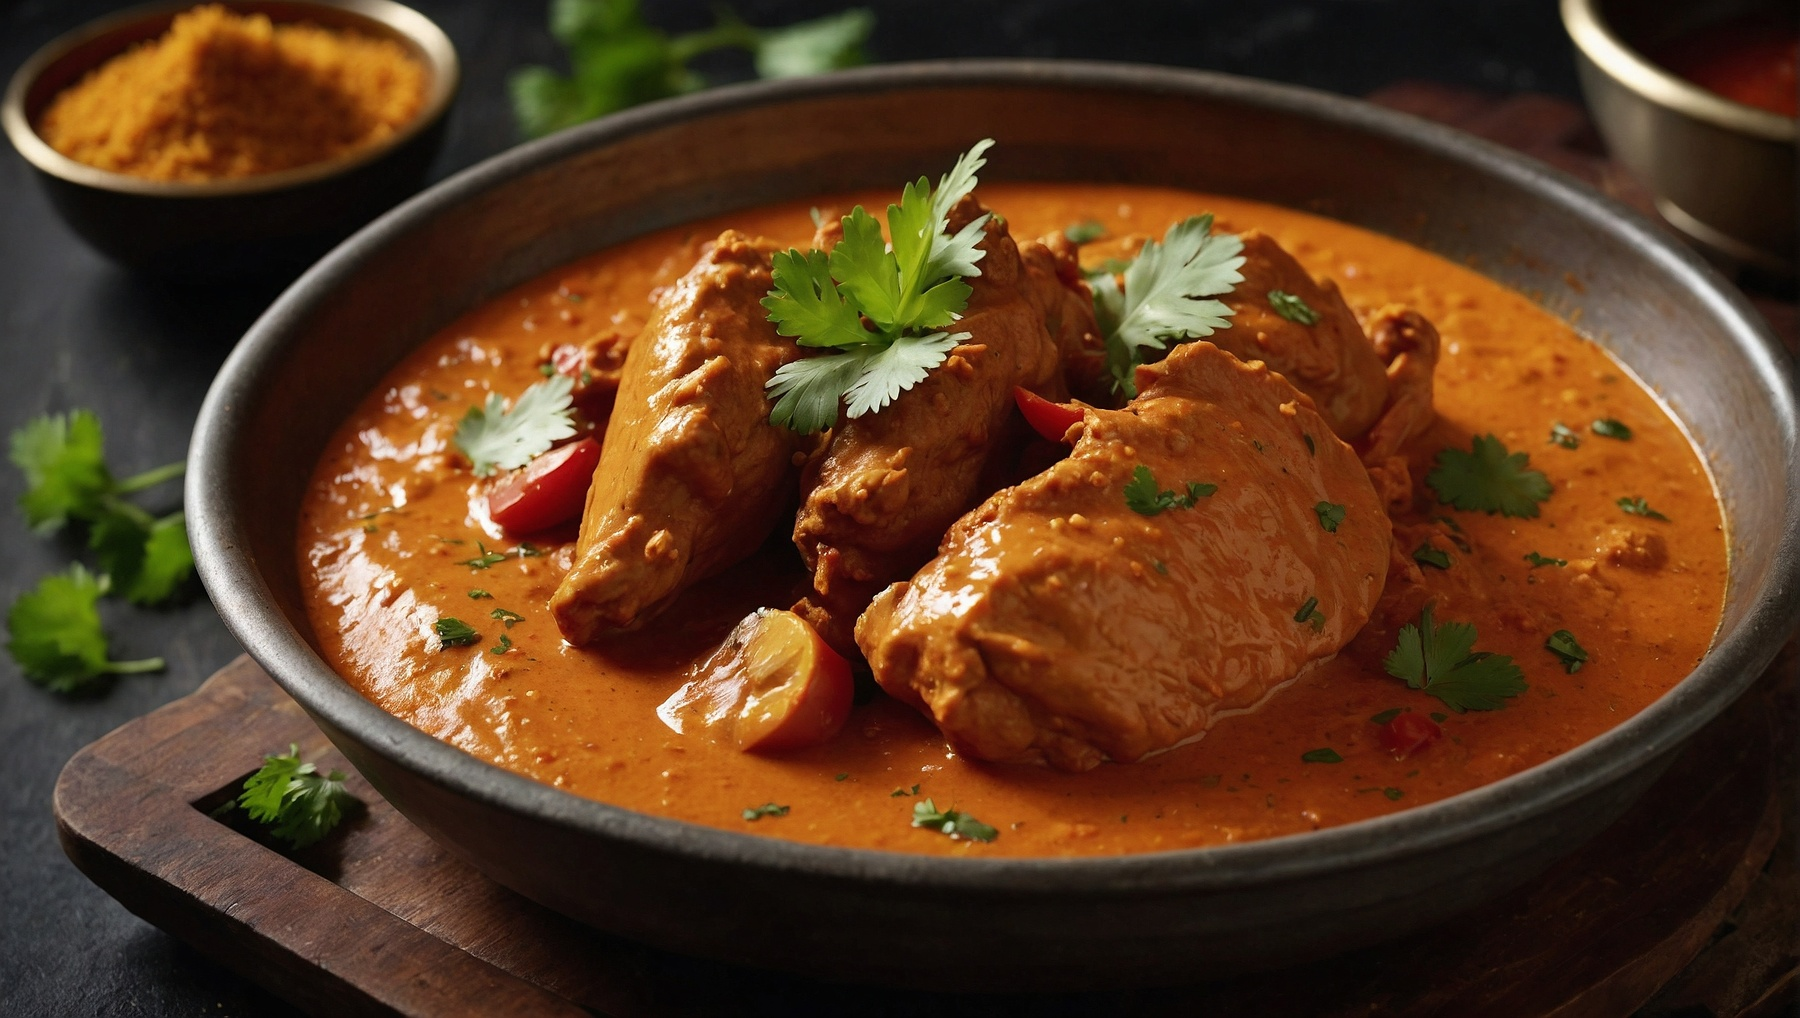 Delicious butter chicken dish showcased in a vibrant display.